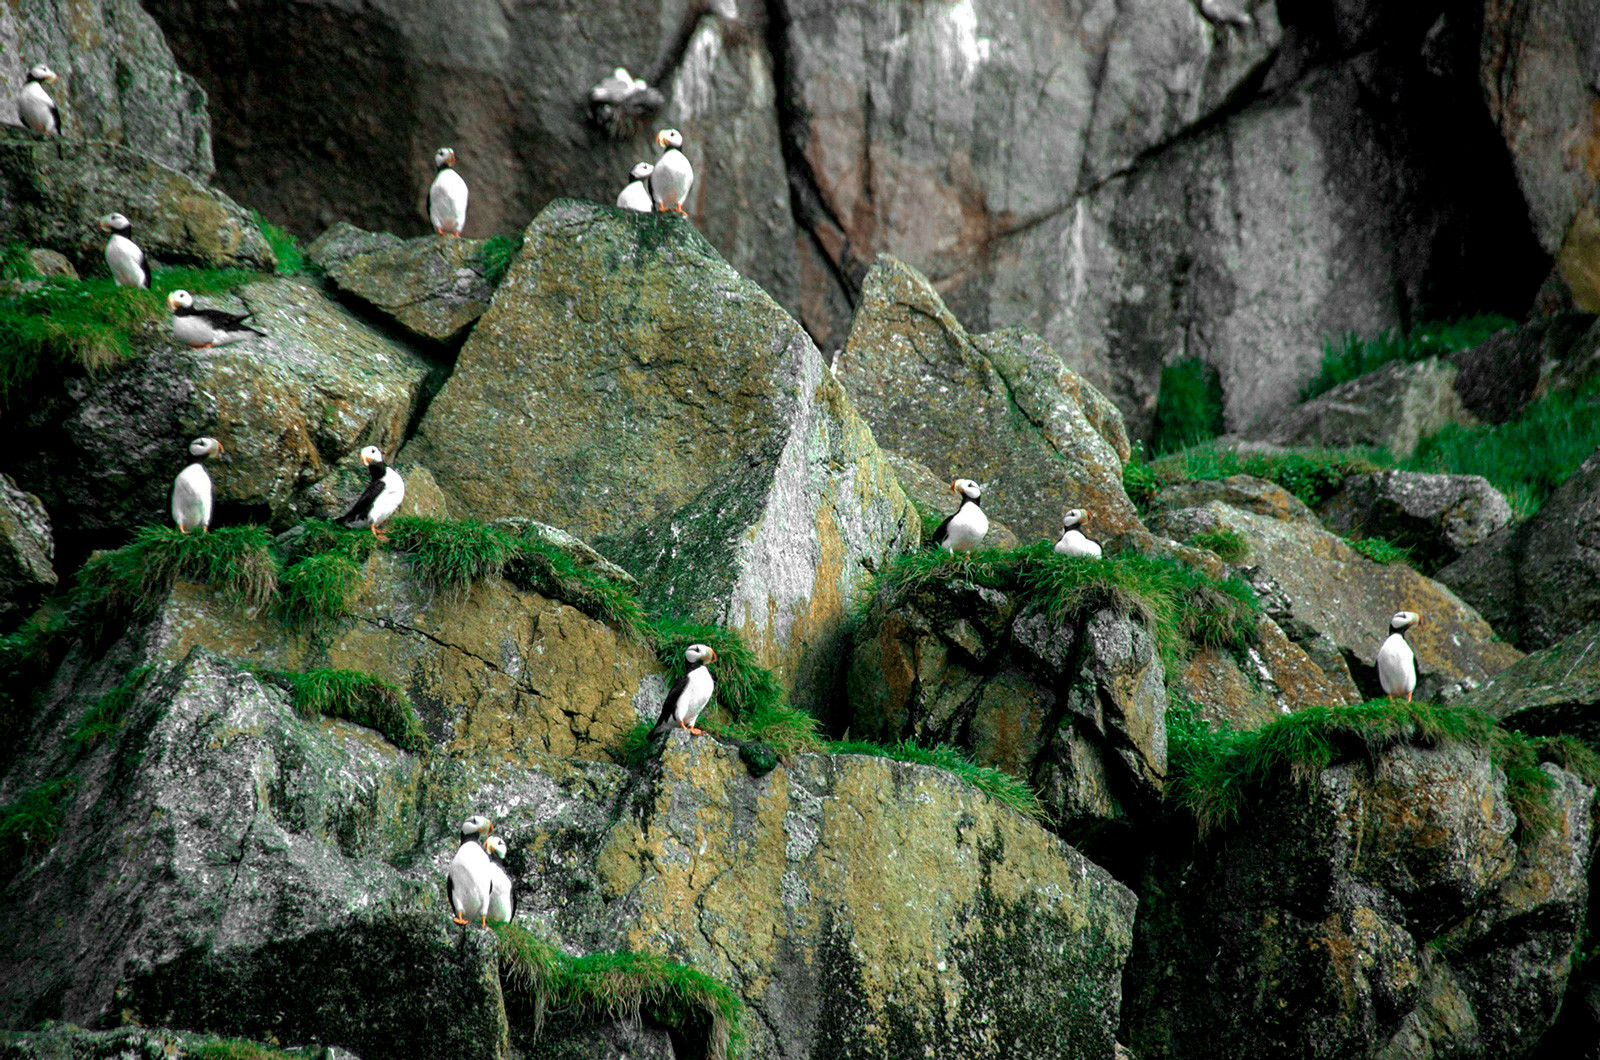 Horned puffins at the Little Diomede island